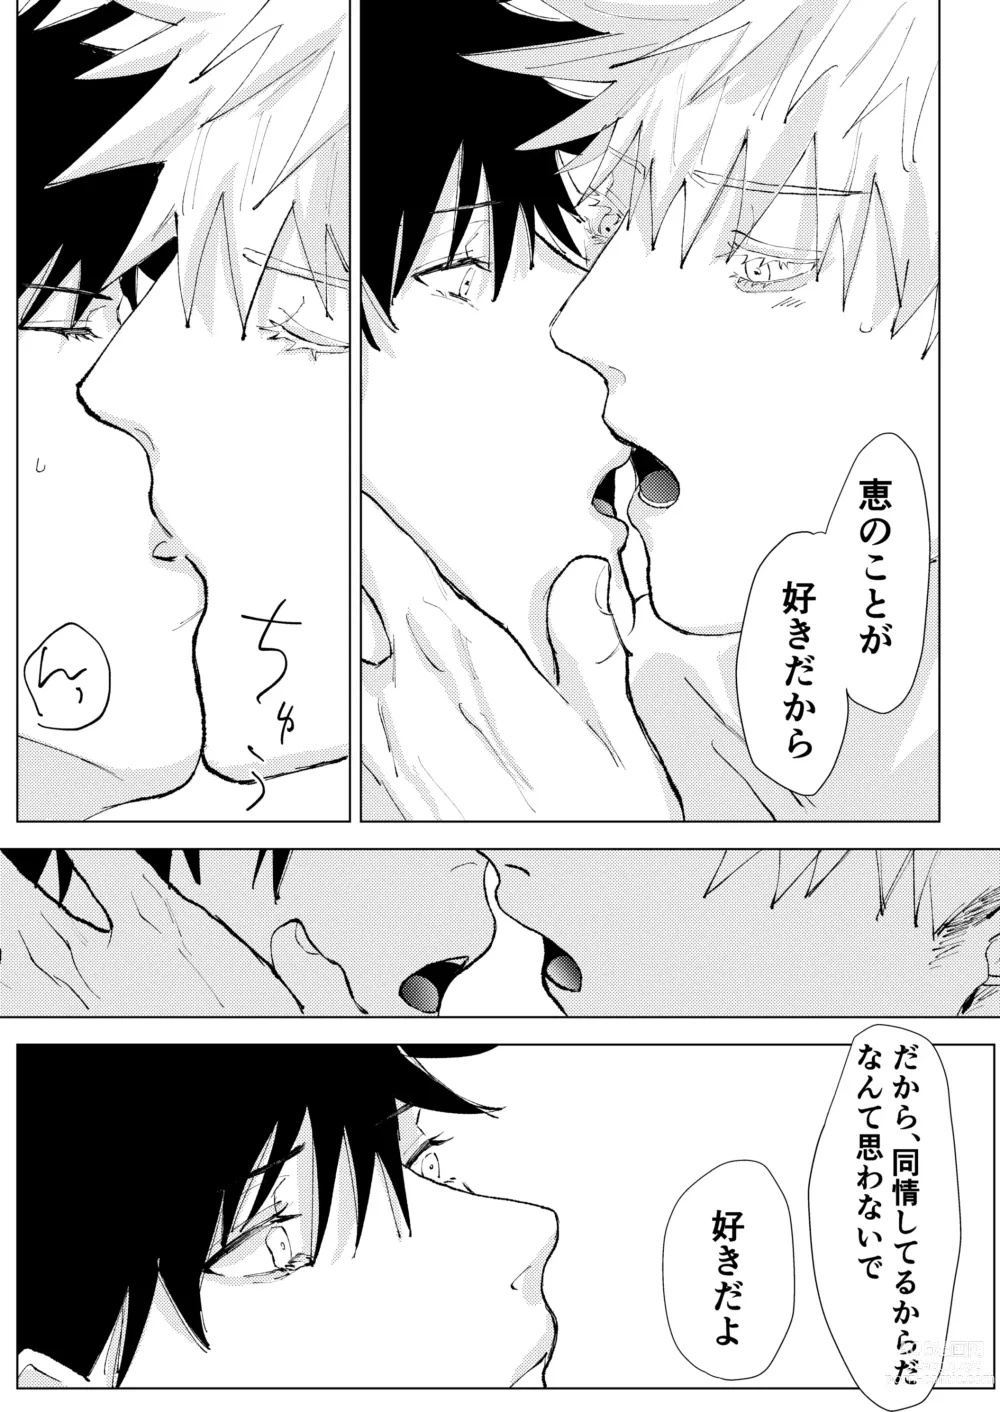 Page 30 of doujinshi Lack of...